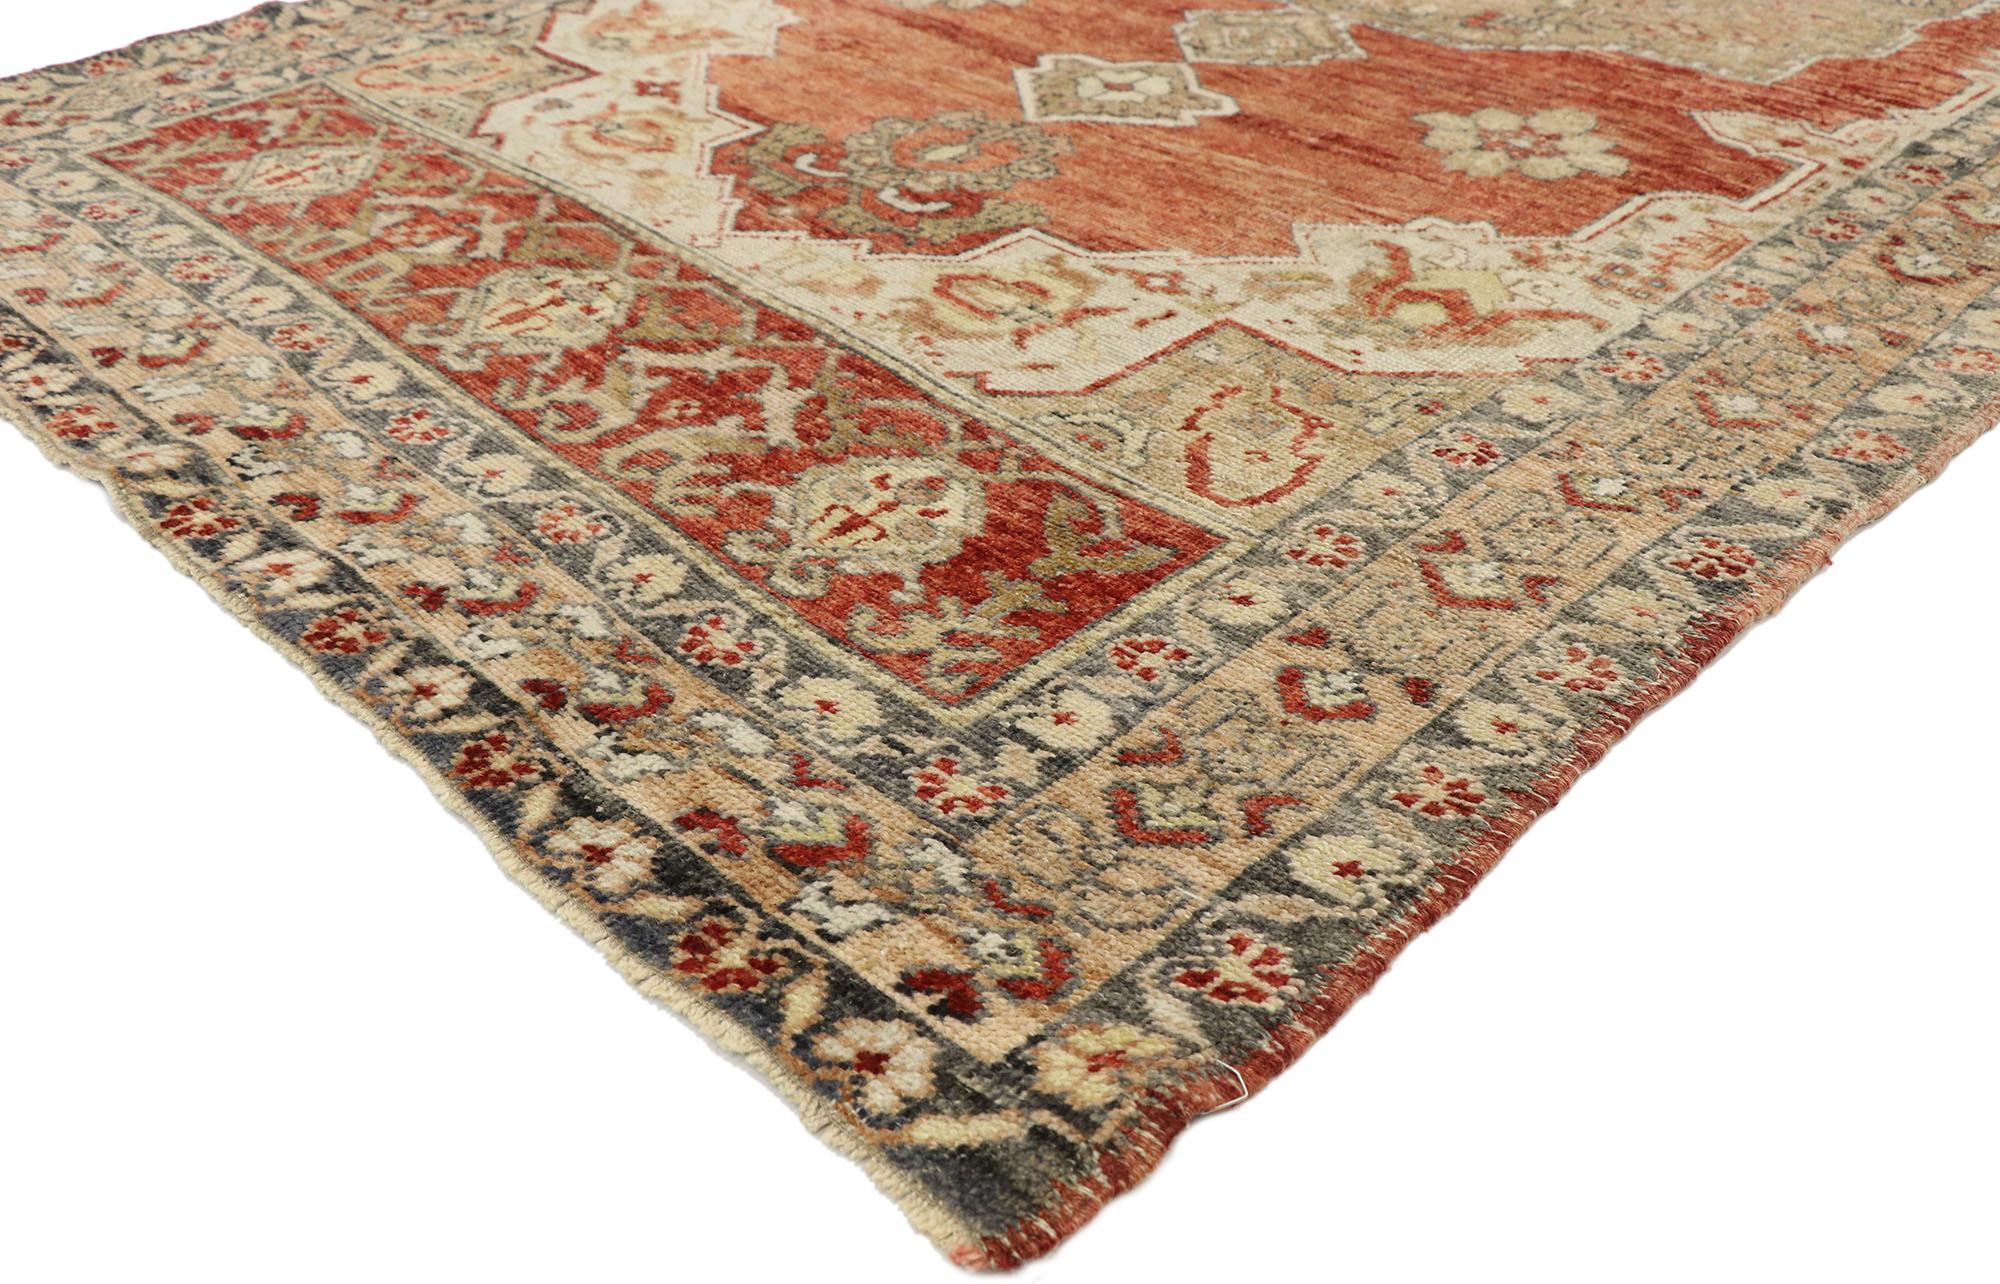 52980, vintage Turkish Oushak gallery rug with rustic Spanish colonial style 04'11 x 11'02. With its timeless design and warm earth-tone colors, this hand knotted wool vintage Turkish Oushak gallery rug astounds with its beauty. The abrashed red